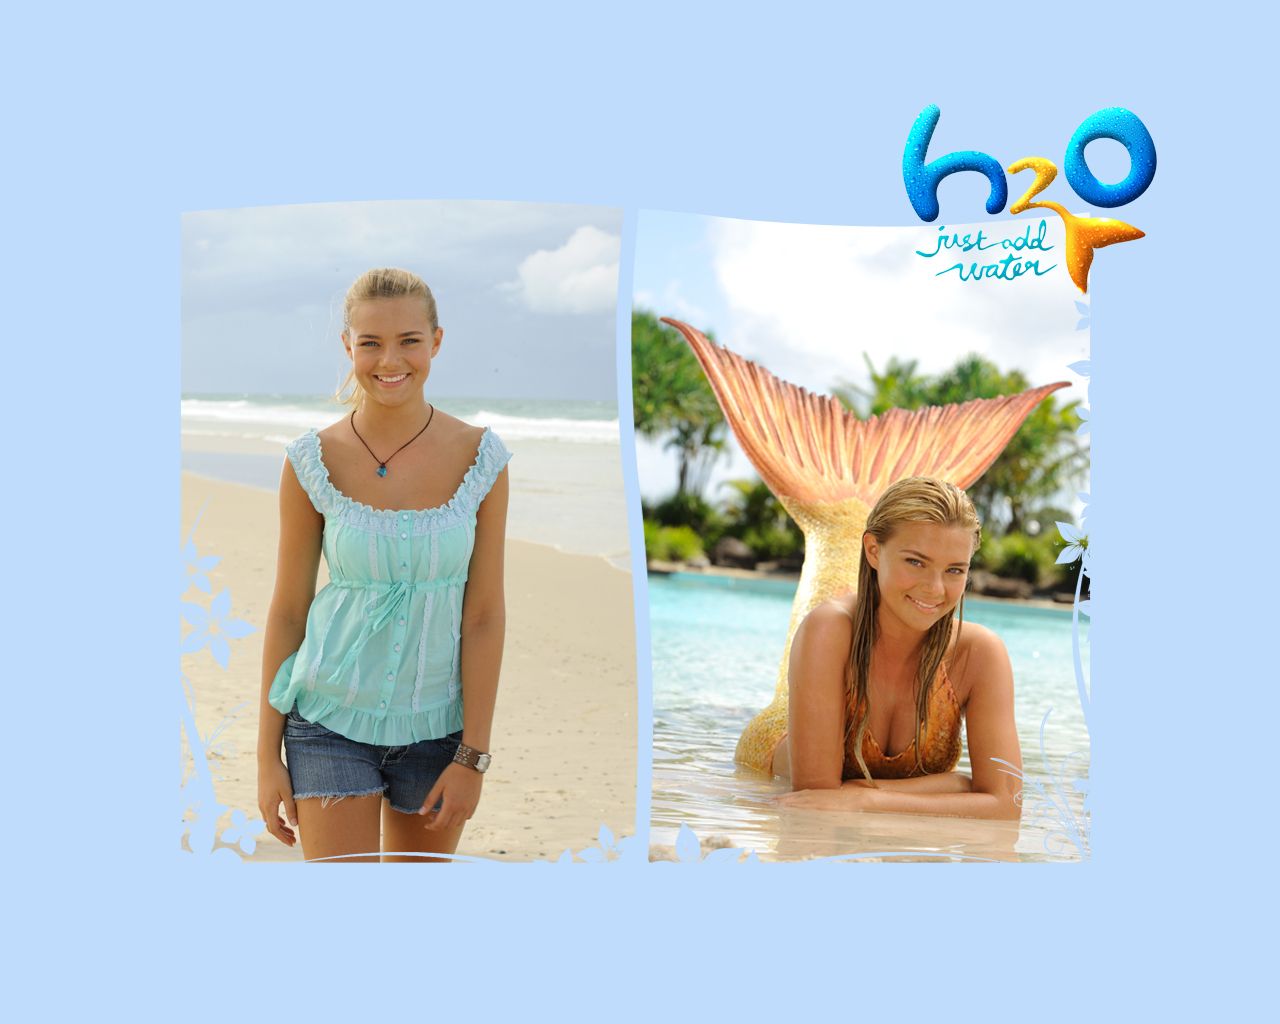 H2O Wallpapers